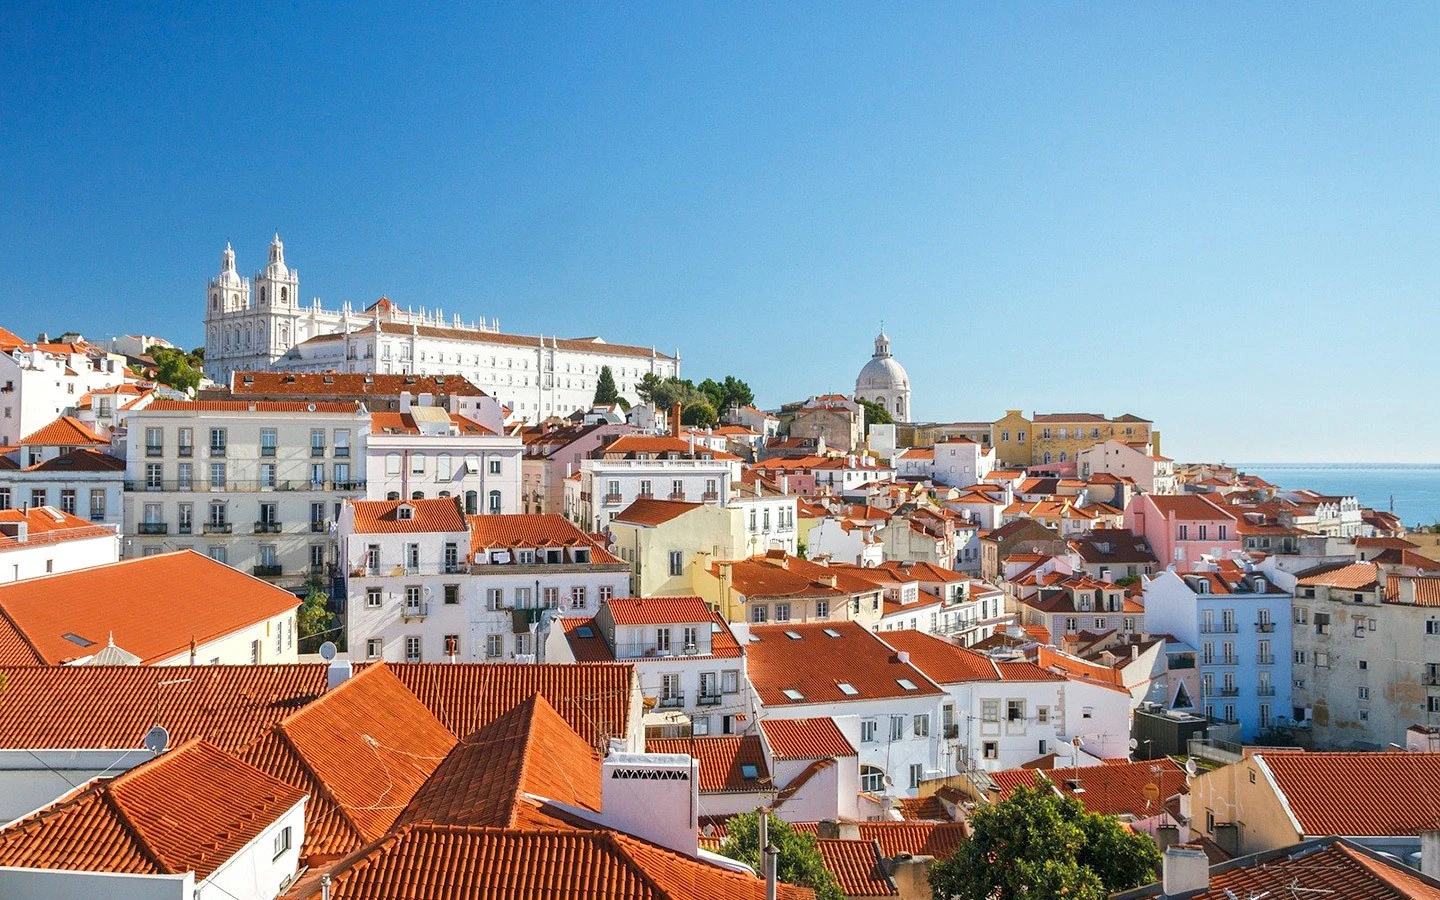 Views over Lisbon, Portugal on a Spain and Portugal by train trip